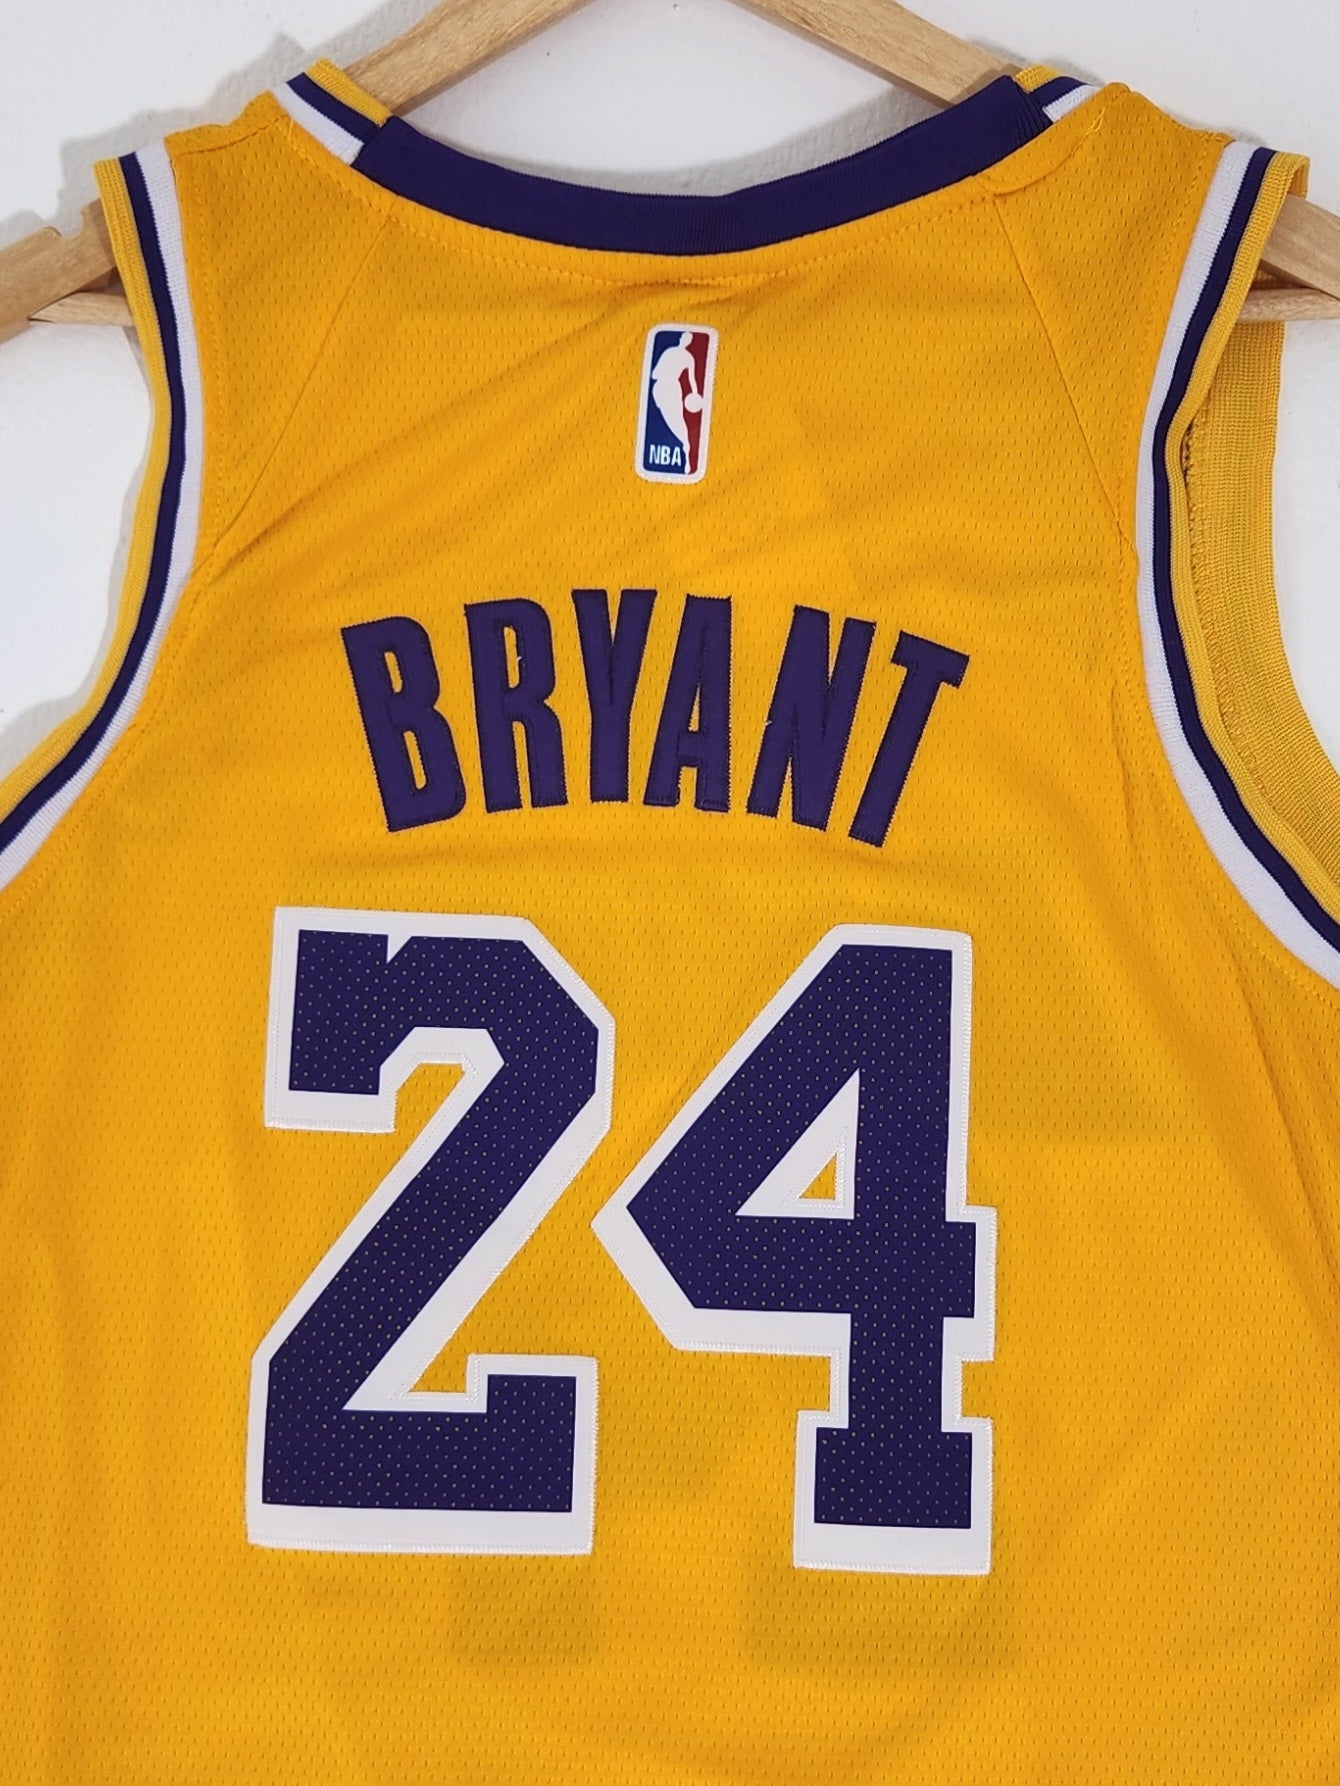 LOS ANGELES LAKERS JERSEY #24 NBA